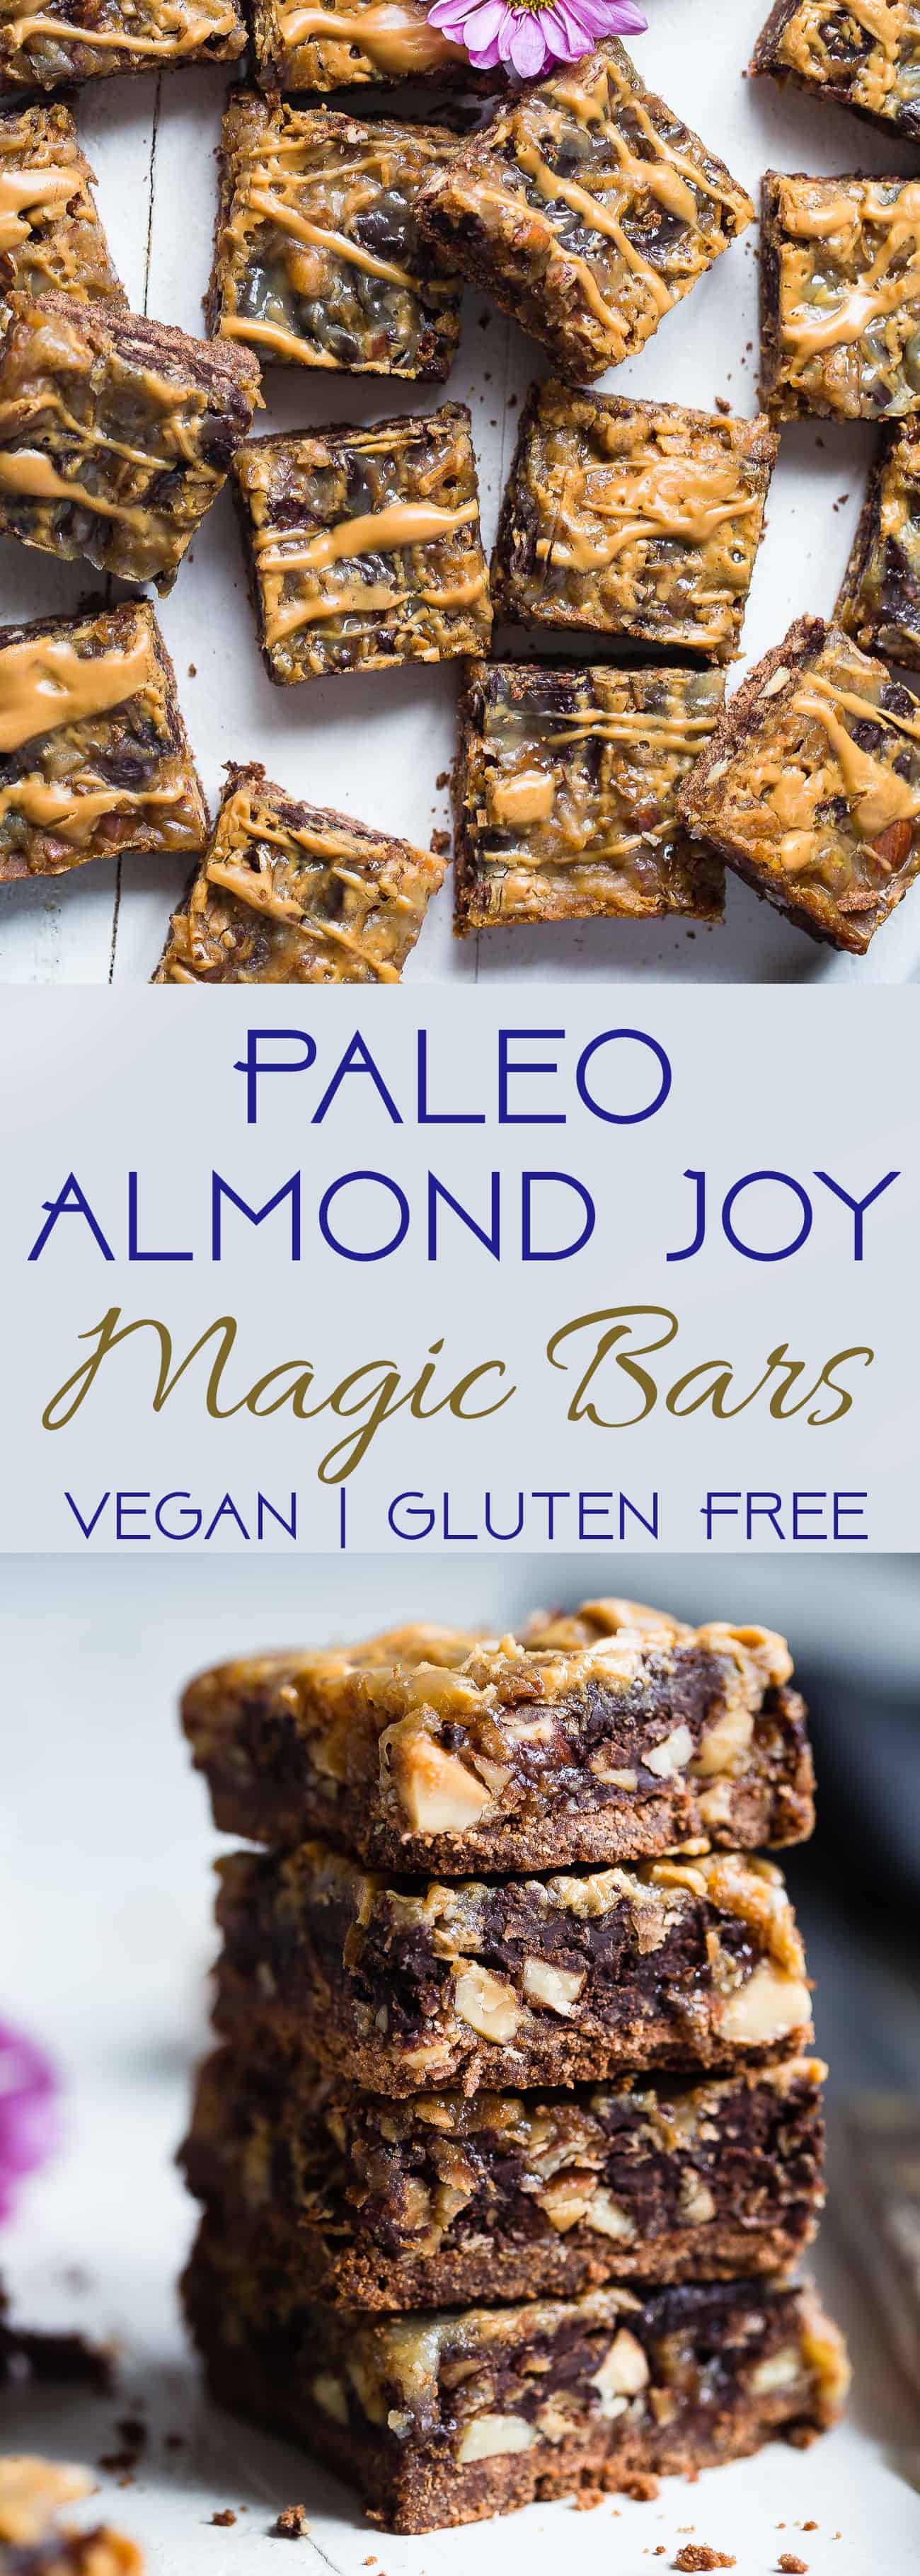 Almond Joy Gluten Free Magic Cookie Bars - These paleo and vegan friendly magic cookie bars taste like an almond joy! They're an easy, healthier spin on a classic treat that you'll never believe is gluten/grain/dairy and refined sugar free! | Foodfaithfitness.com | @FoodFaithFit